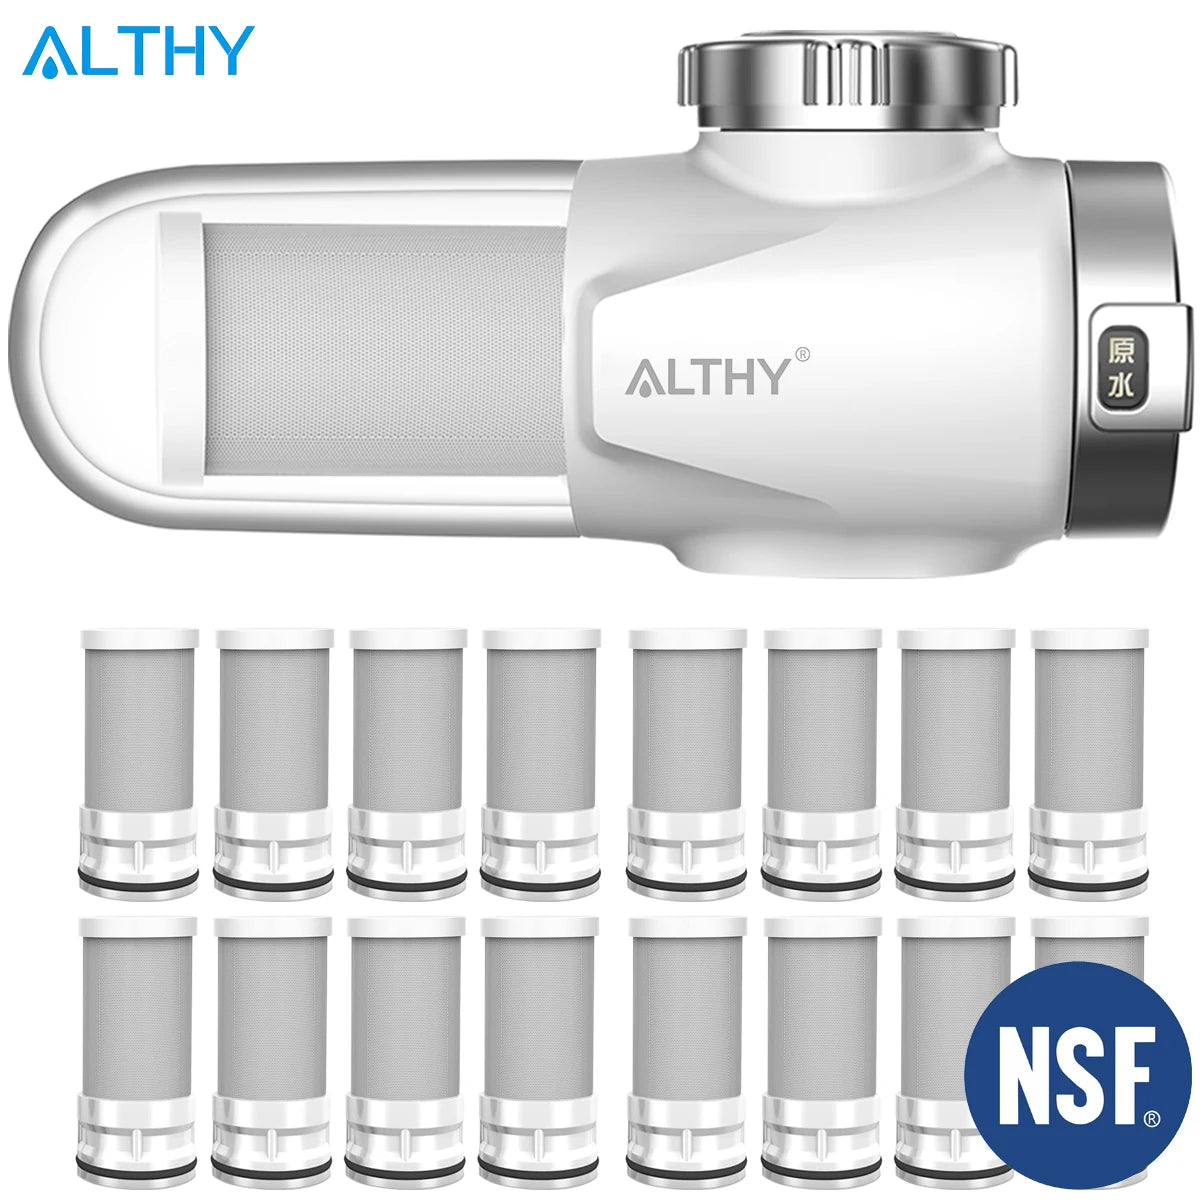 ALTHY ACF System Faucet Water Filter, Tap Purifier, Reduces Lead, Chlorine & Bad Taste NSF Certified Kitchen （16xReplace Filter）